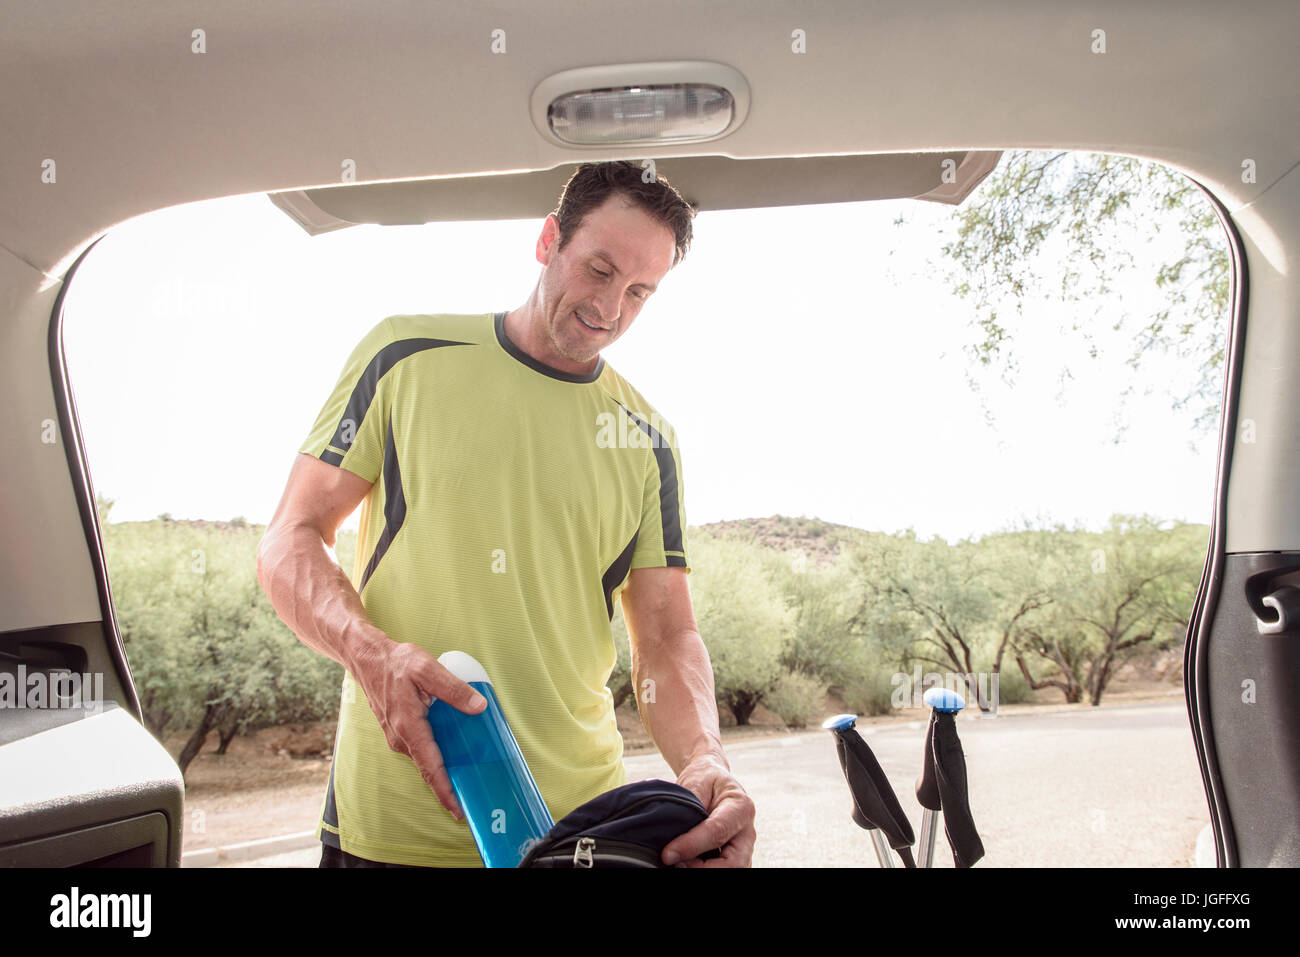 Hispanic man pulling water bottle from backpack in car Stock Photo